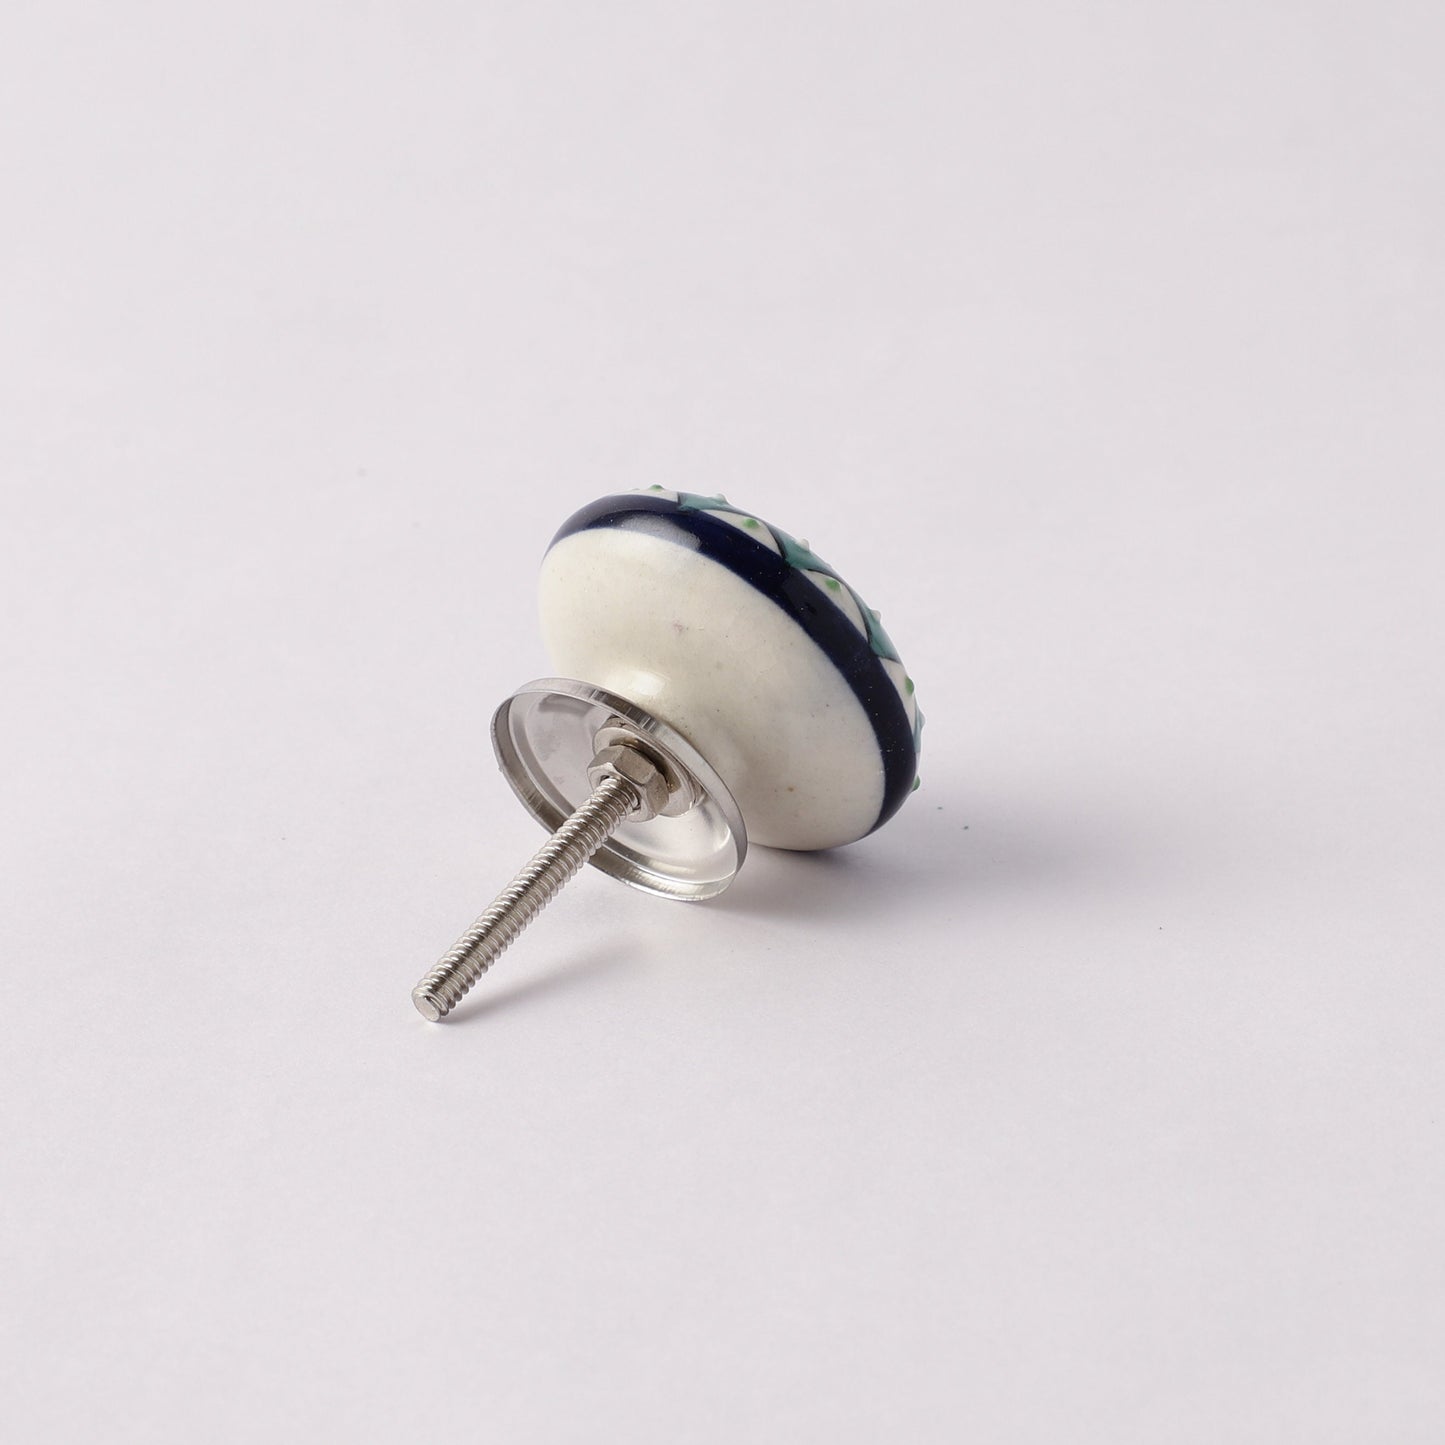 Classic Style Teal and Blue Ceramic Pull Knobs (C25)